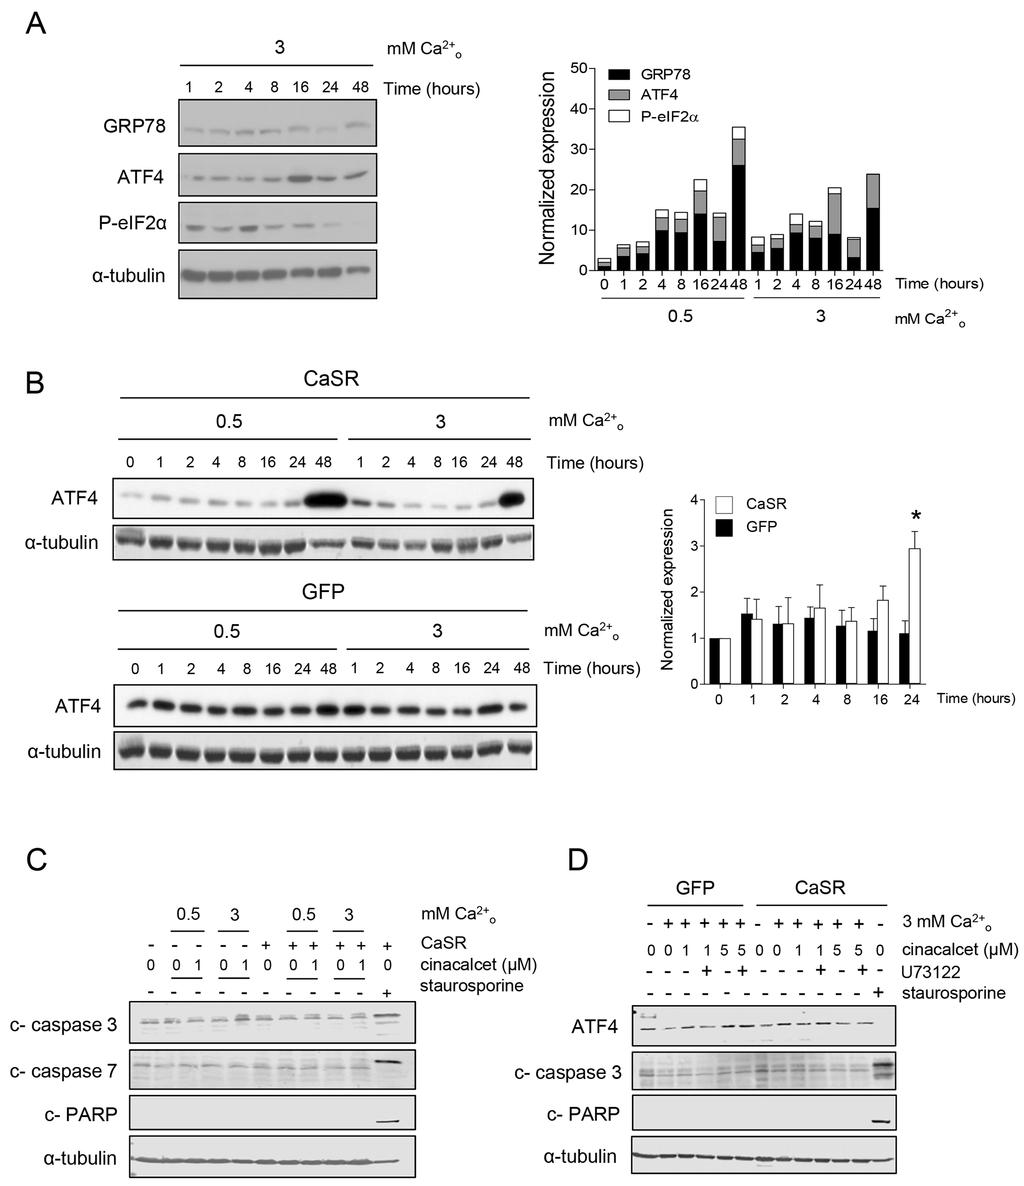 Supplementary Figure S2: Cinacalcet induces ER stress in CaSR-positive, MYCN-amplified neuroblastoma cell lines. A.